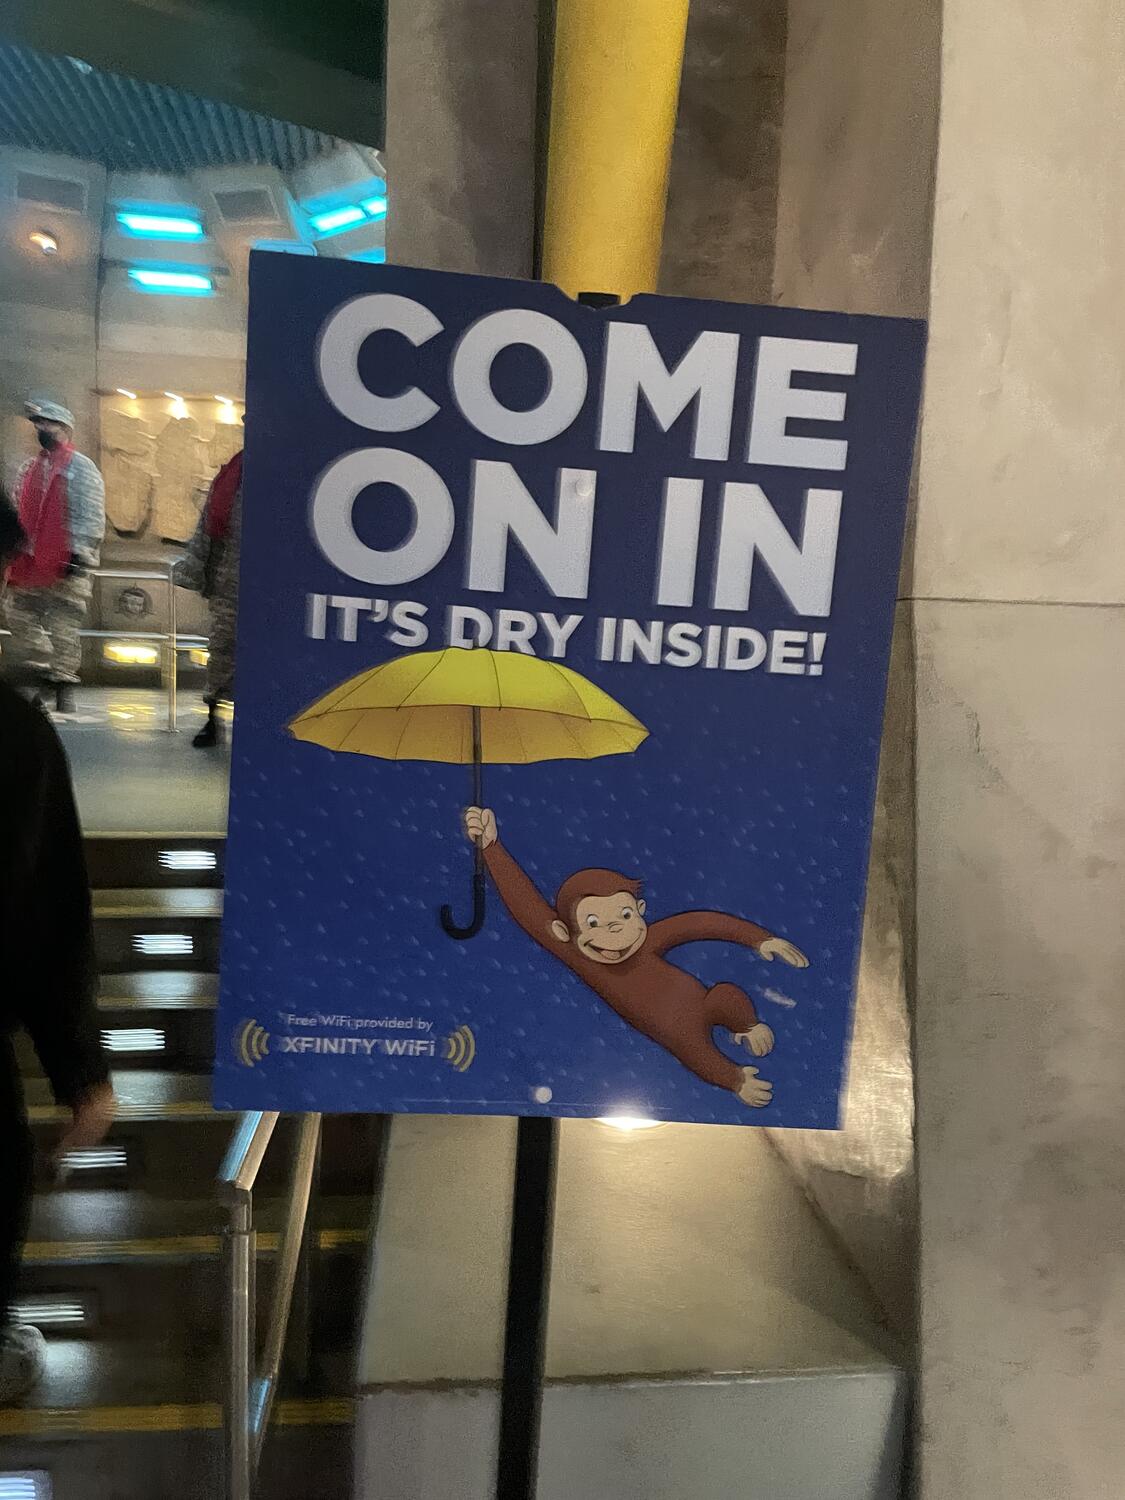 A sign standing at the entrance to Transformers: The Ride. It features Curious George with a yellow umbrella and reads "Come on in, it's dry inside!"